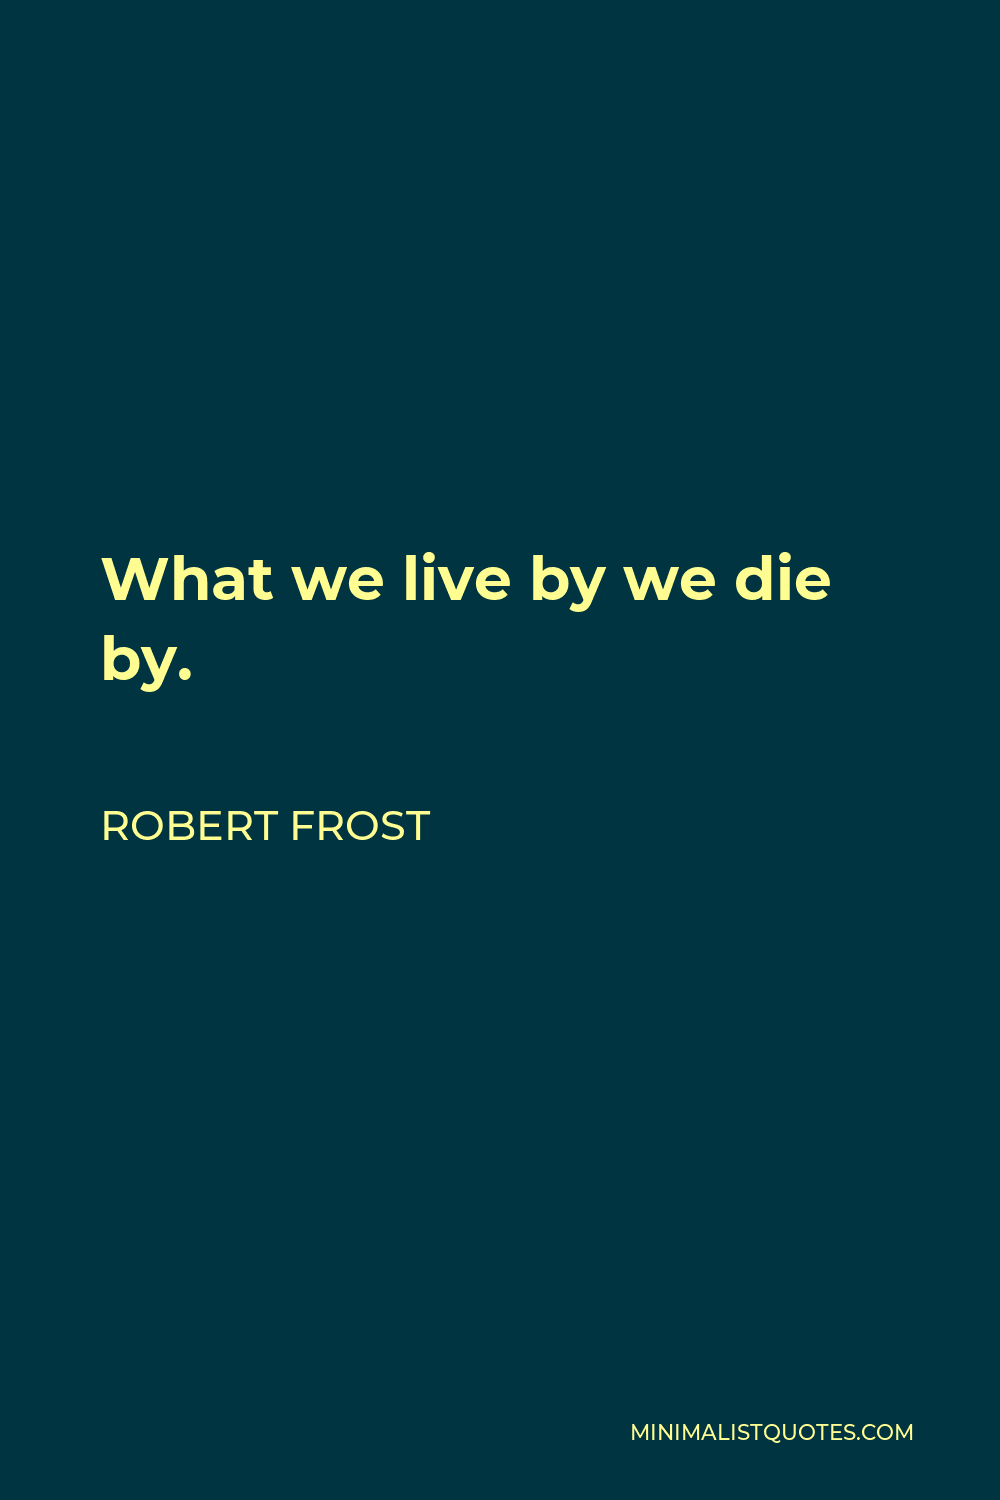 Robert Frost Quote - What we live by we die by.